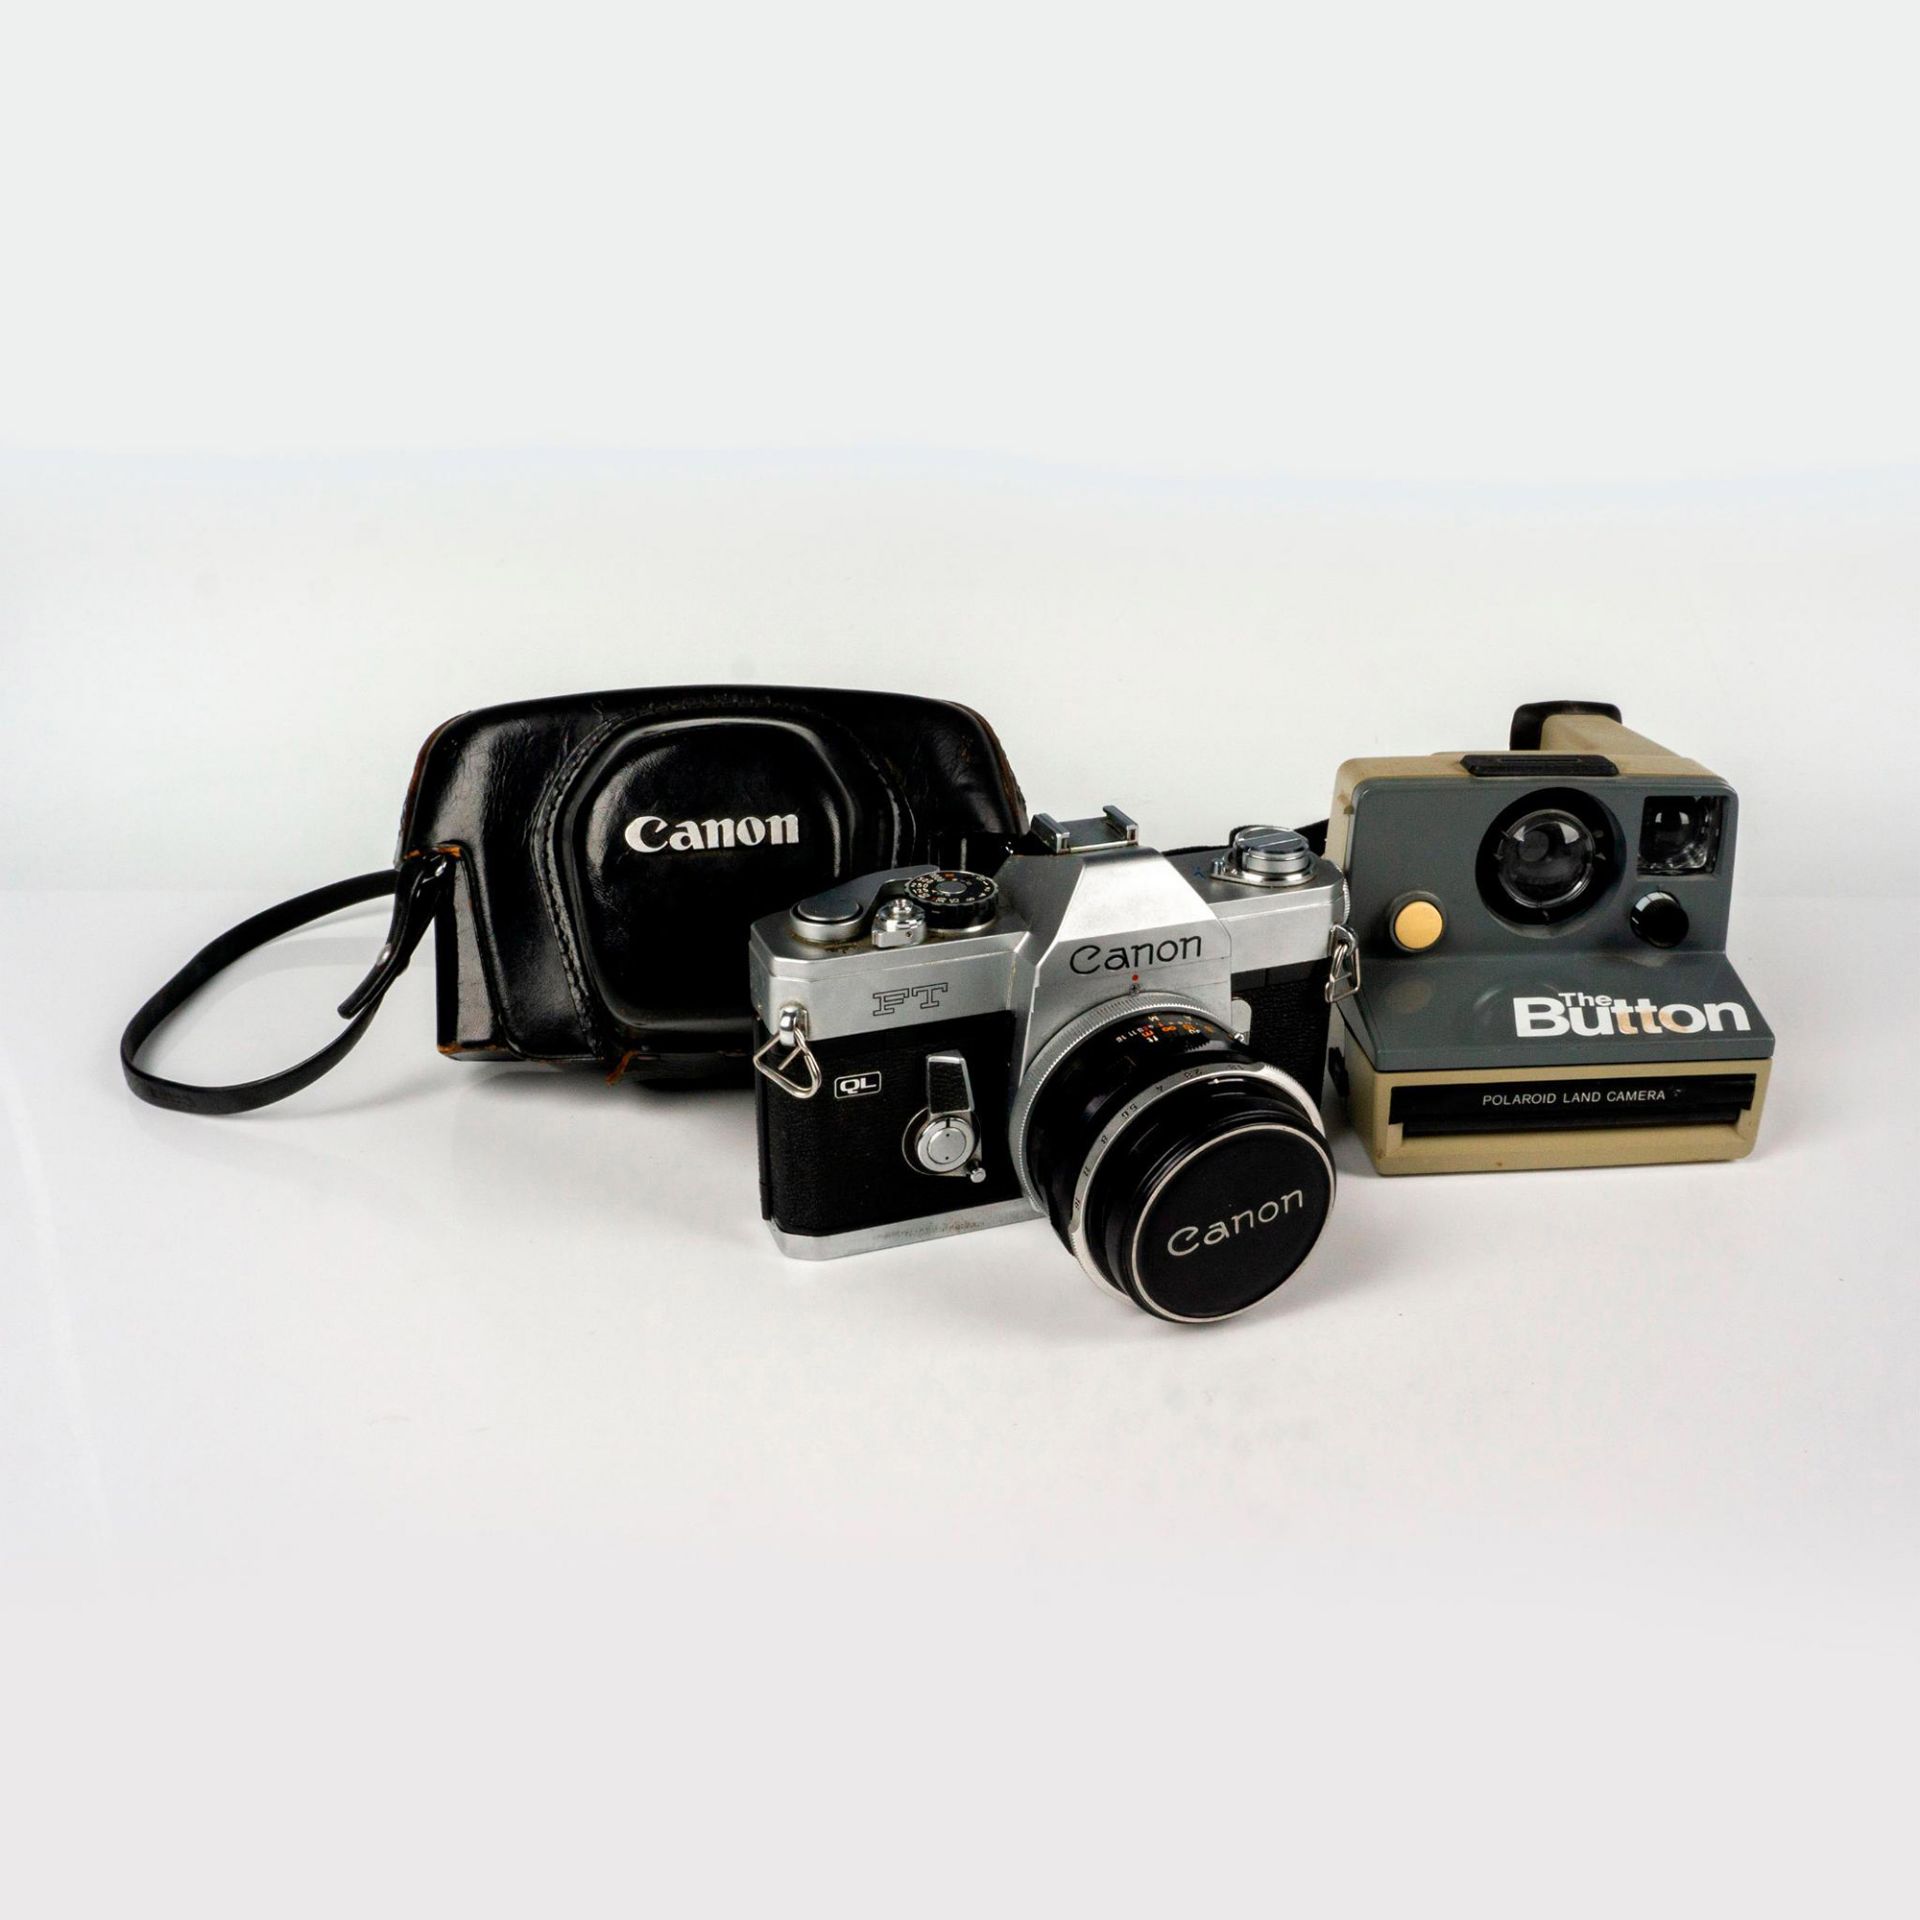 2pc Vintage Camera Collectibles - Image 2 of 4